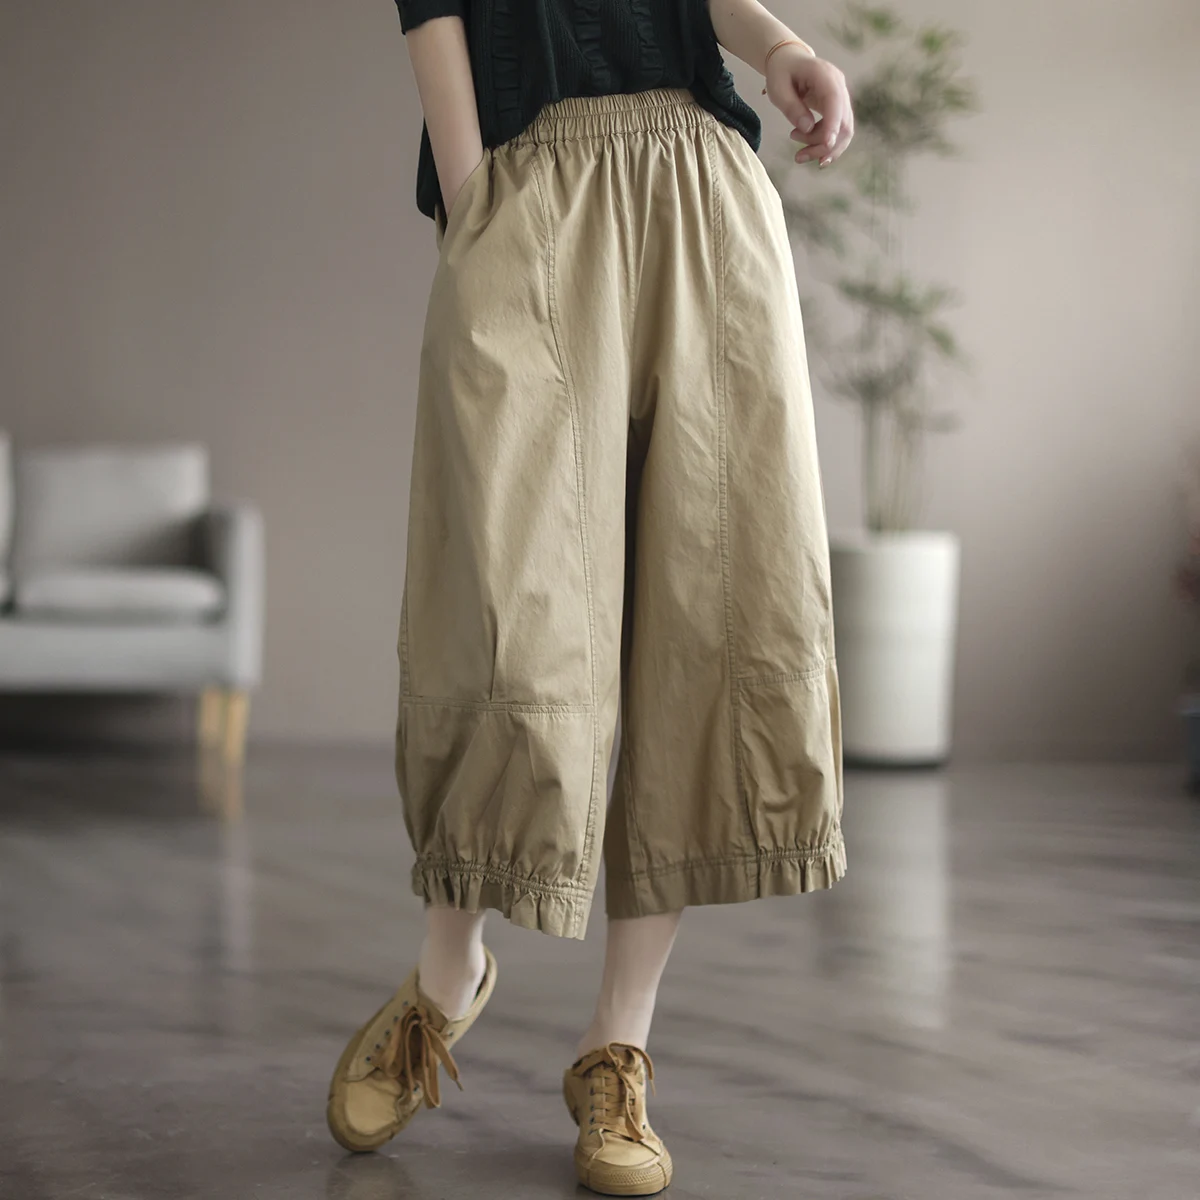 Vintage Cotton Linen Women Pants Summer Solid Elastic Wide Leg Casual All Match Female Clothing Top Quality